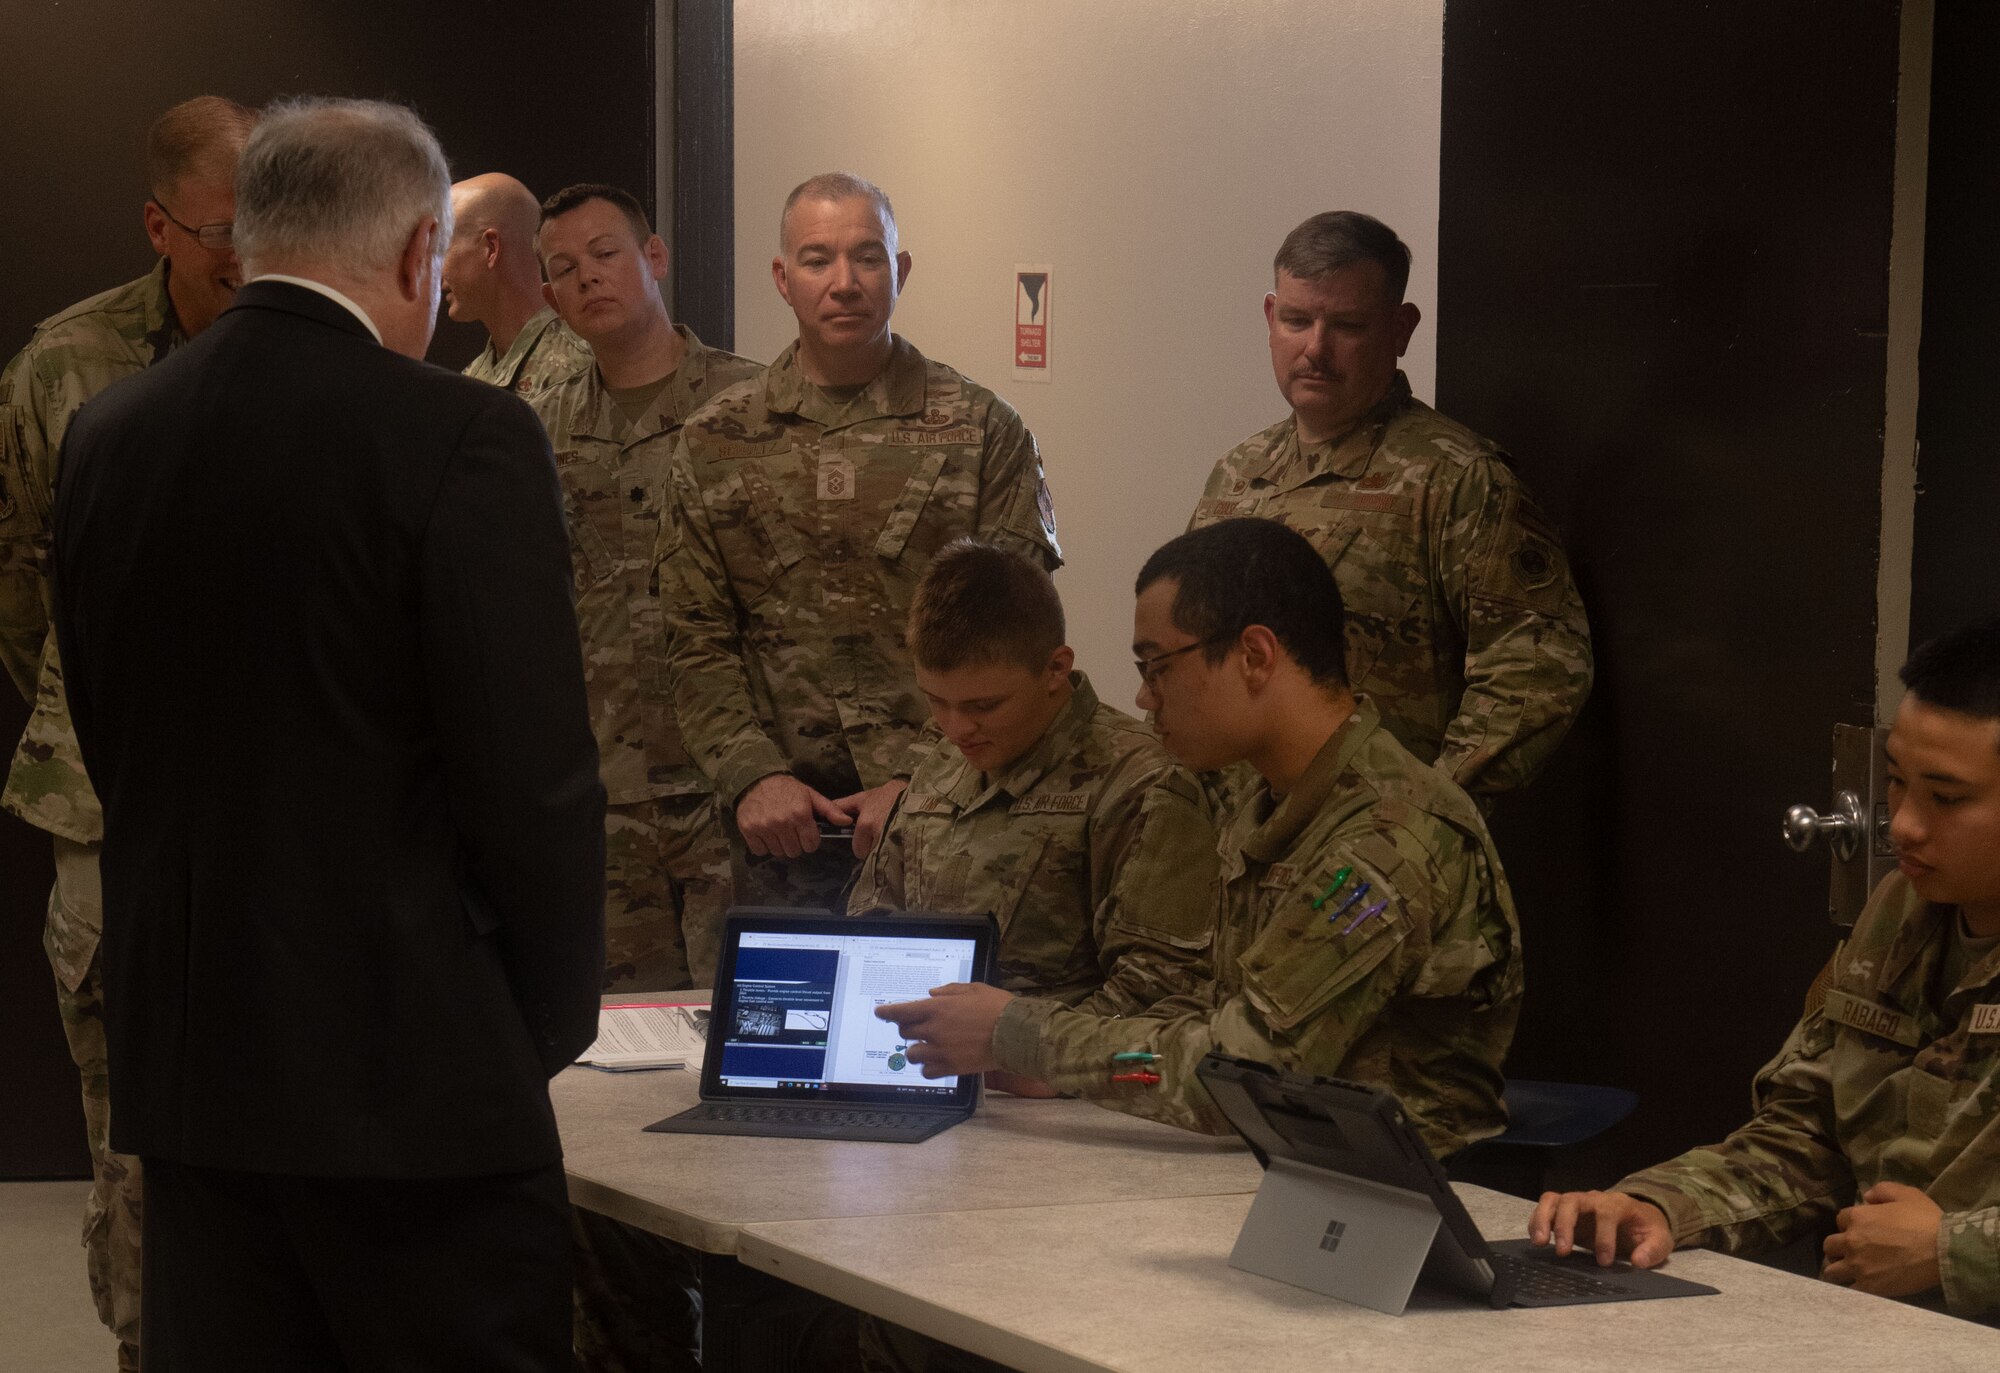 SECAF watches an Airman in Training do school work on a tablet.